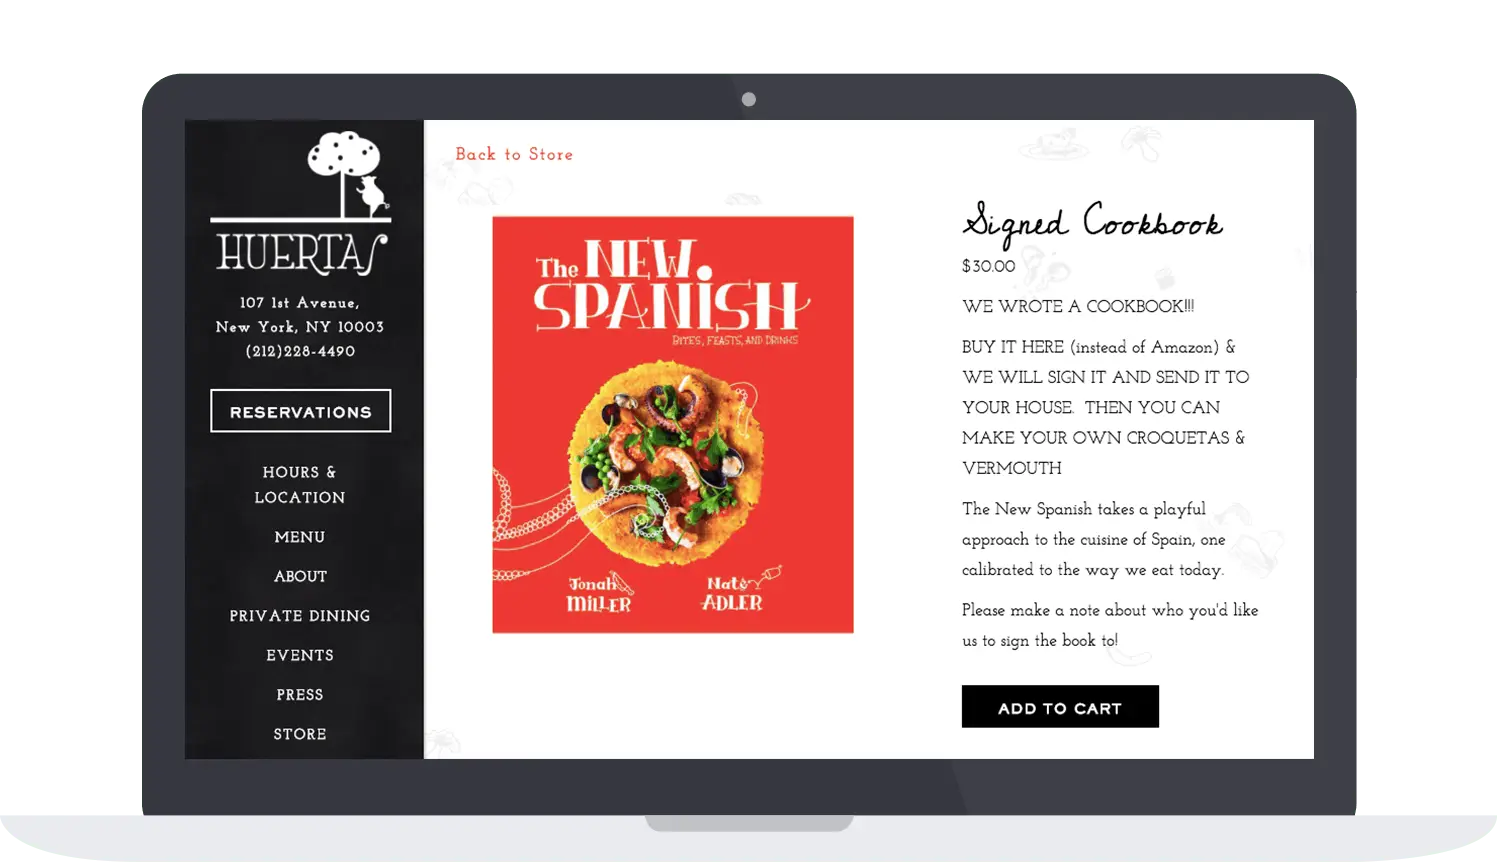 Huerta website's online store where they sell their cookbook